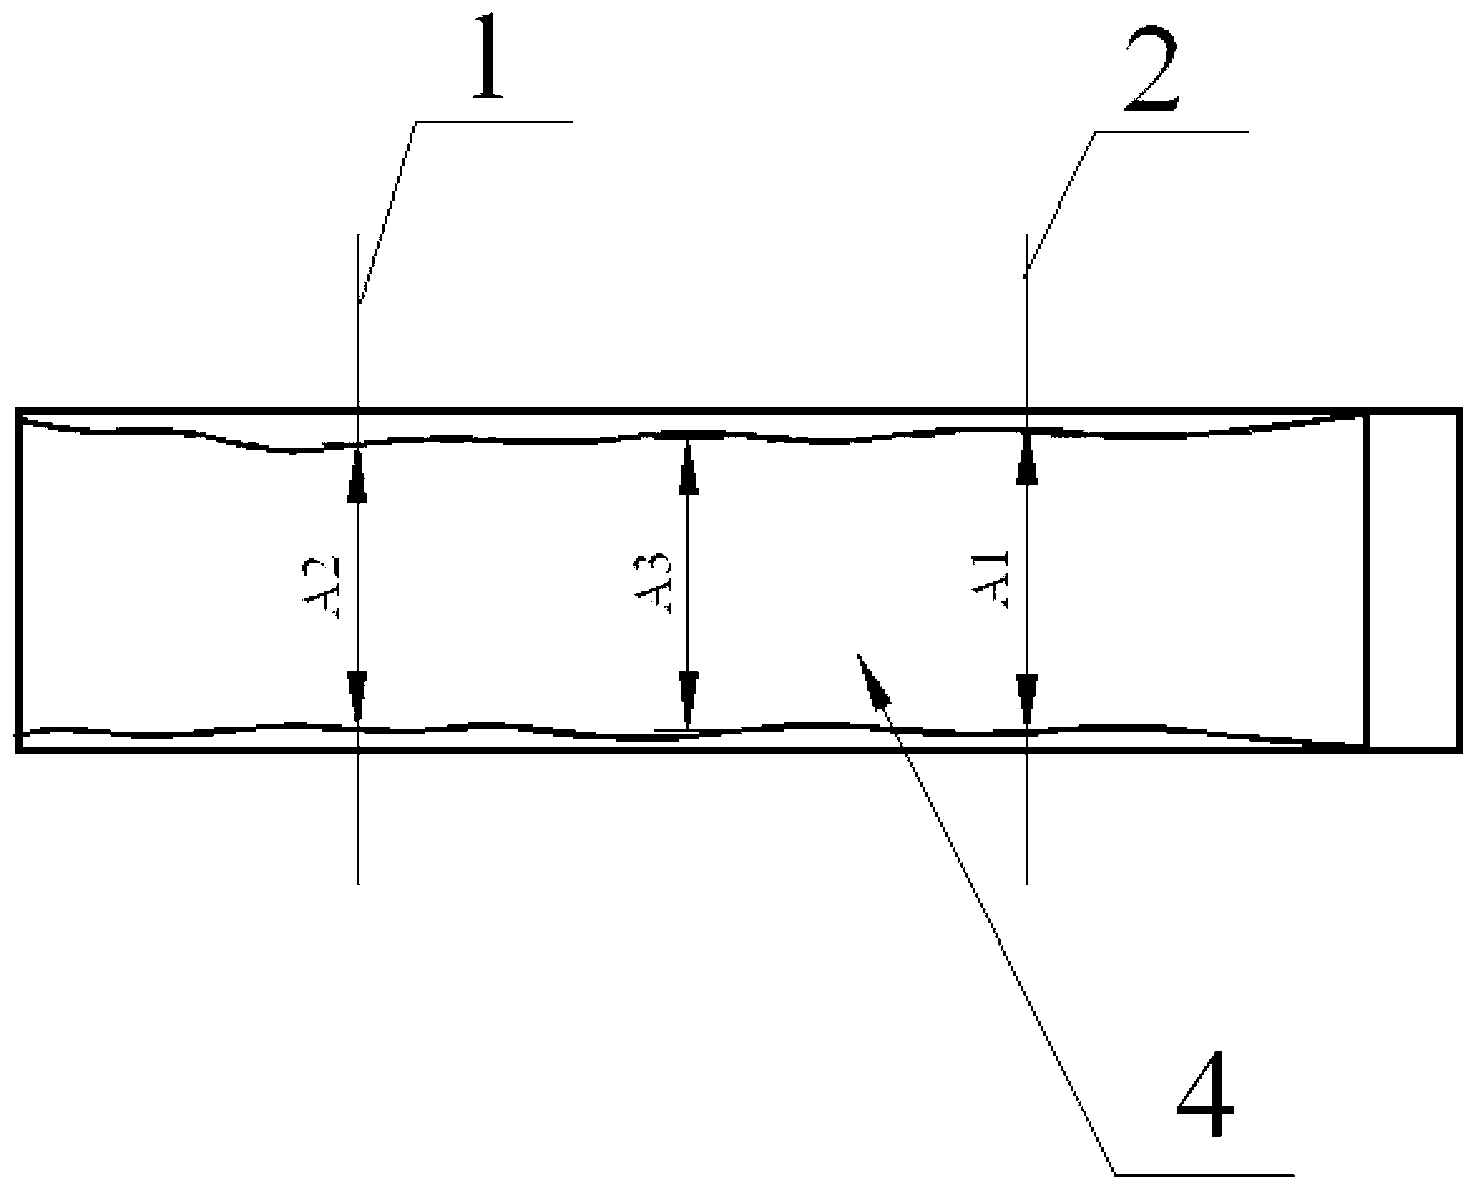 Measuring scale for drop weight tear tests and method for measuring fracture surfaces of drop weight tear test samples